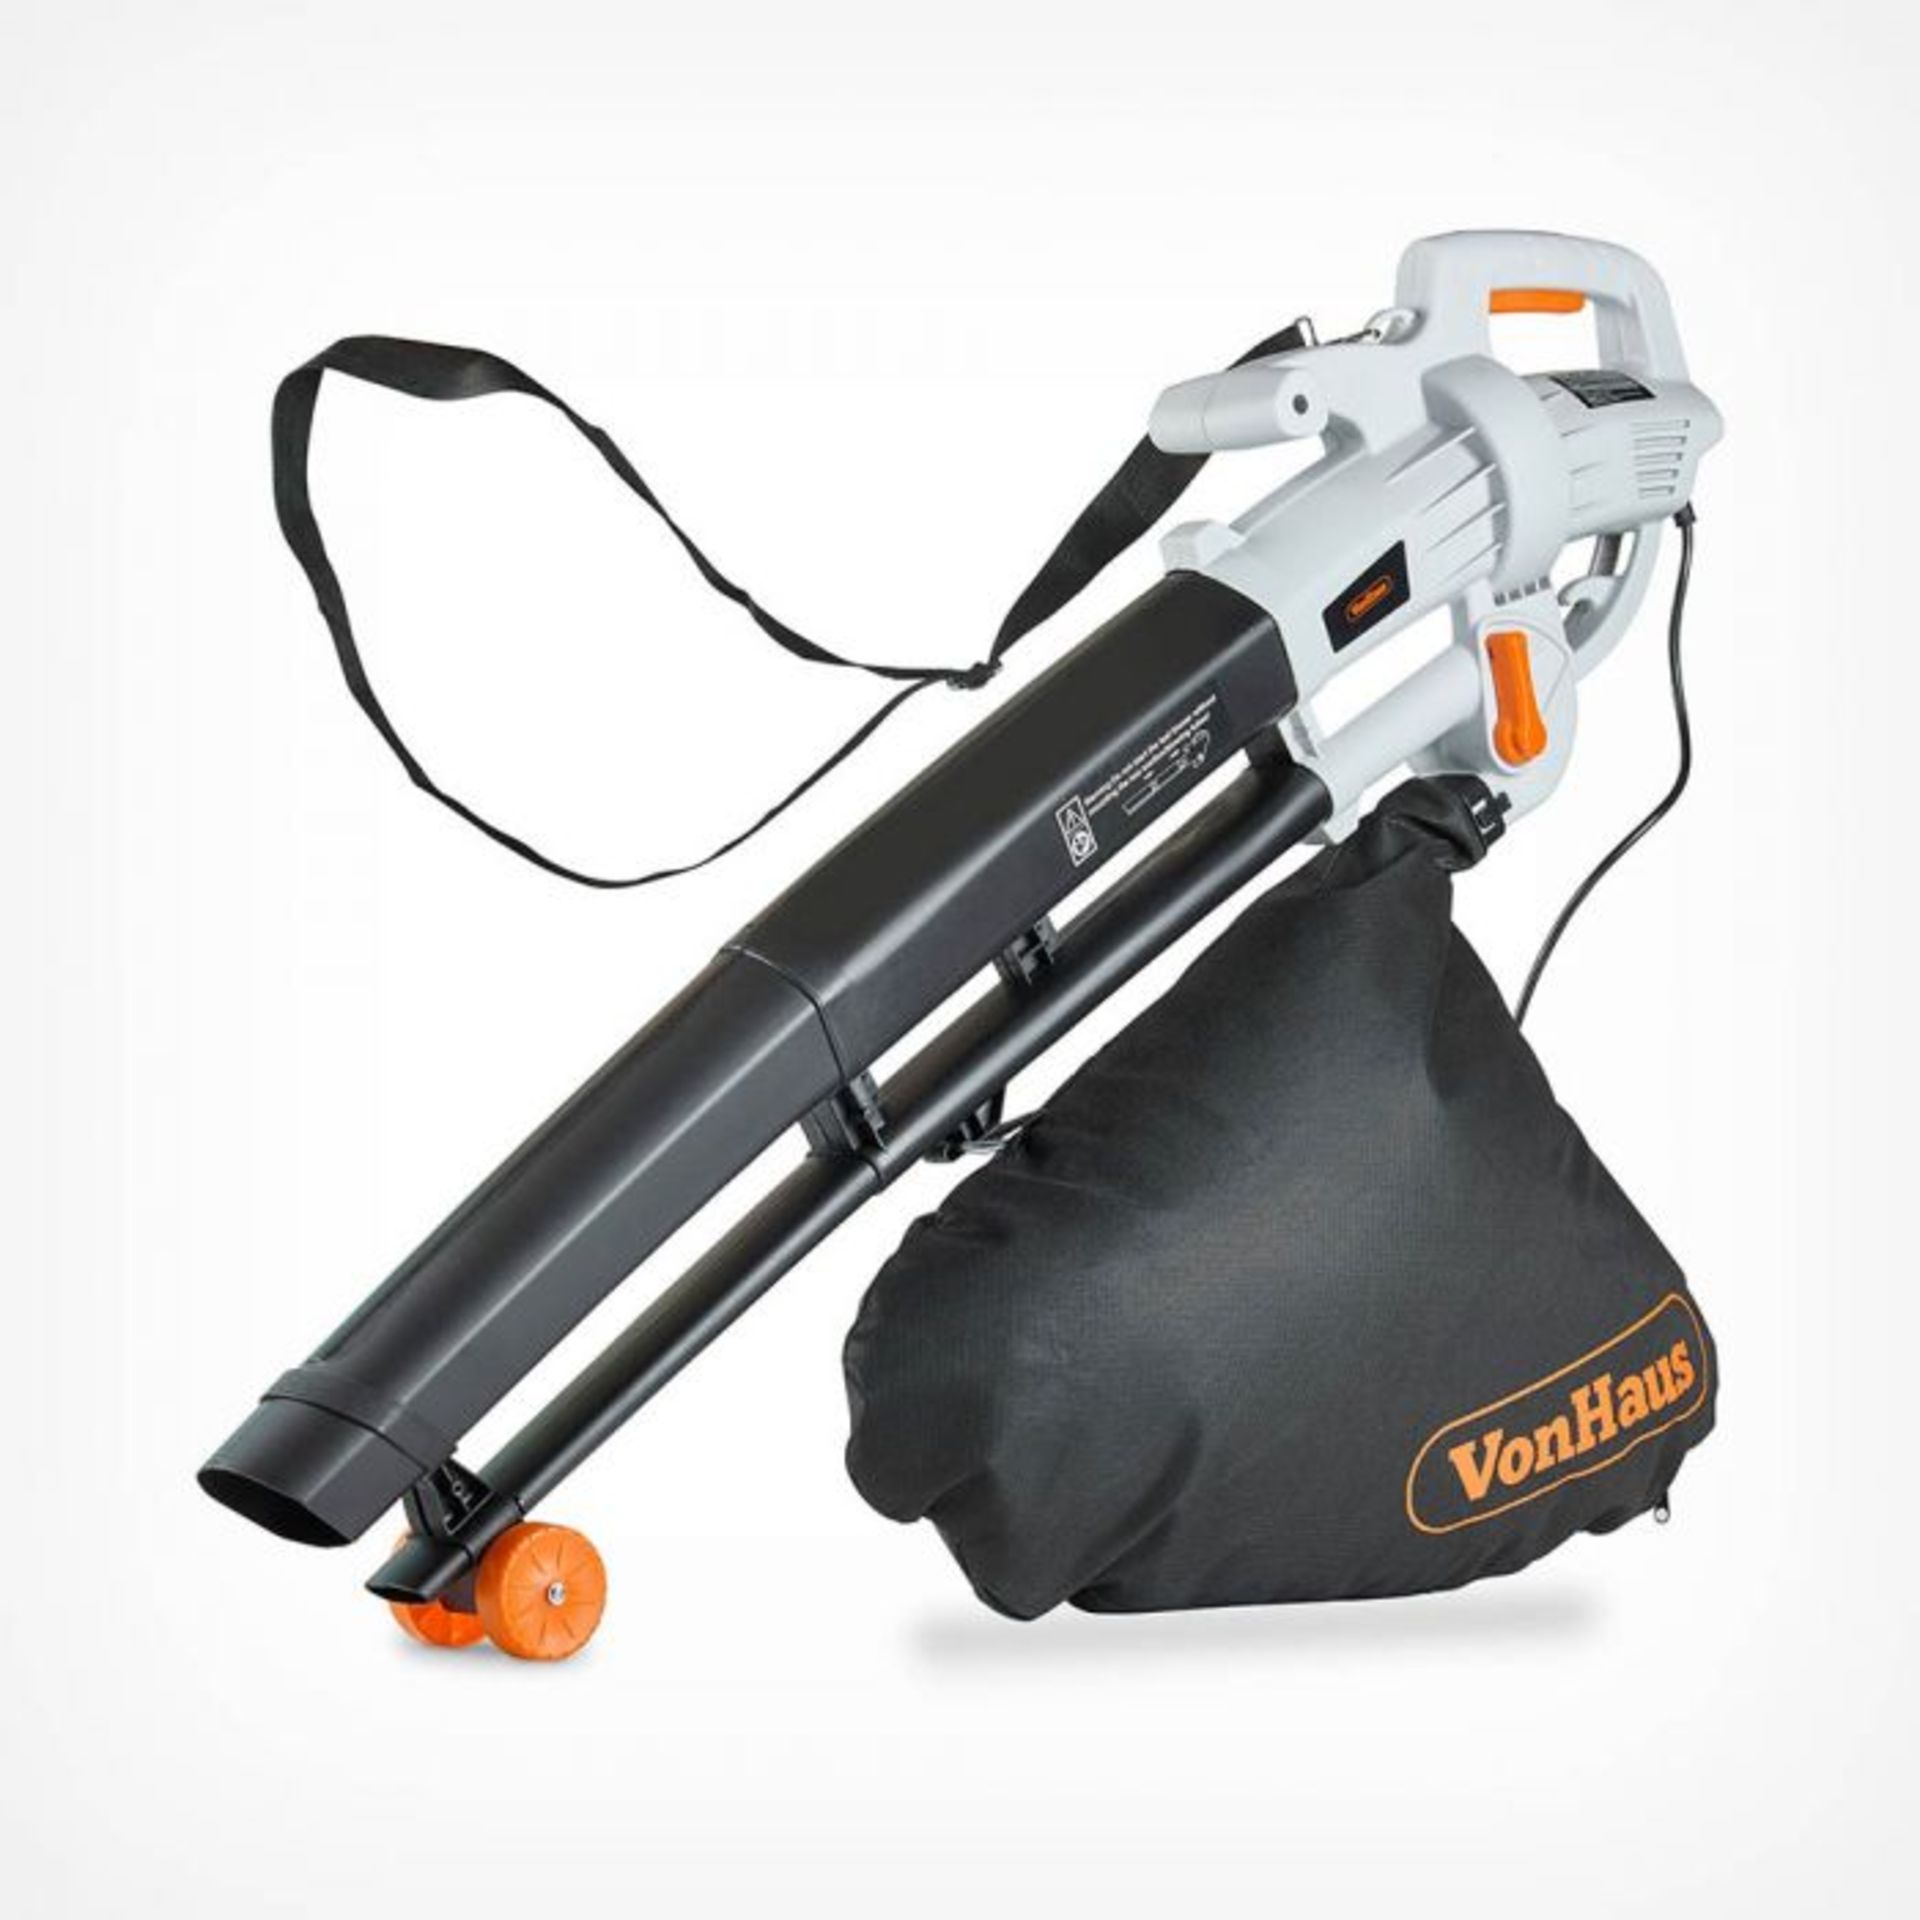 3 in 1 Leaf Blower. With a powerful motor, this highly efficient leaf blower allows you to